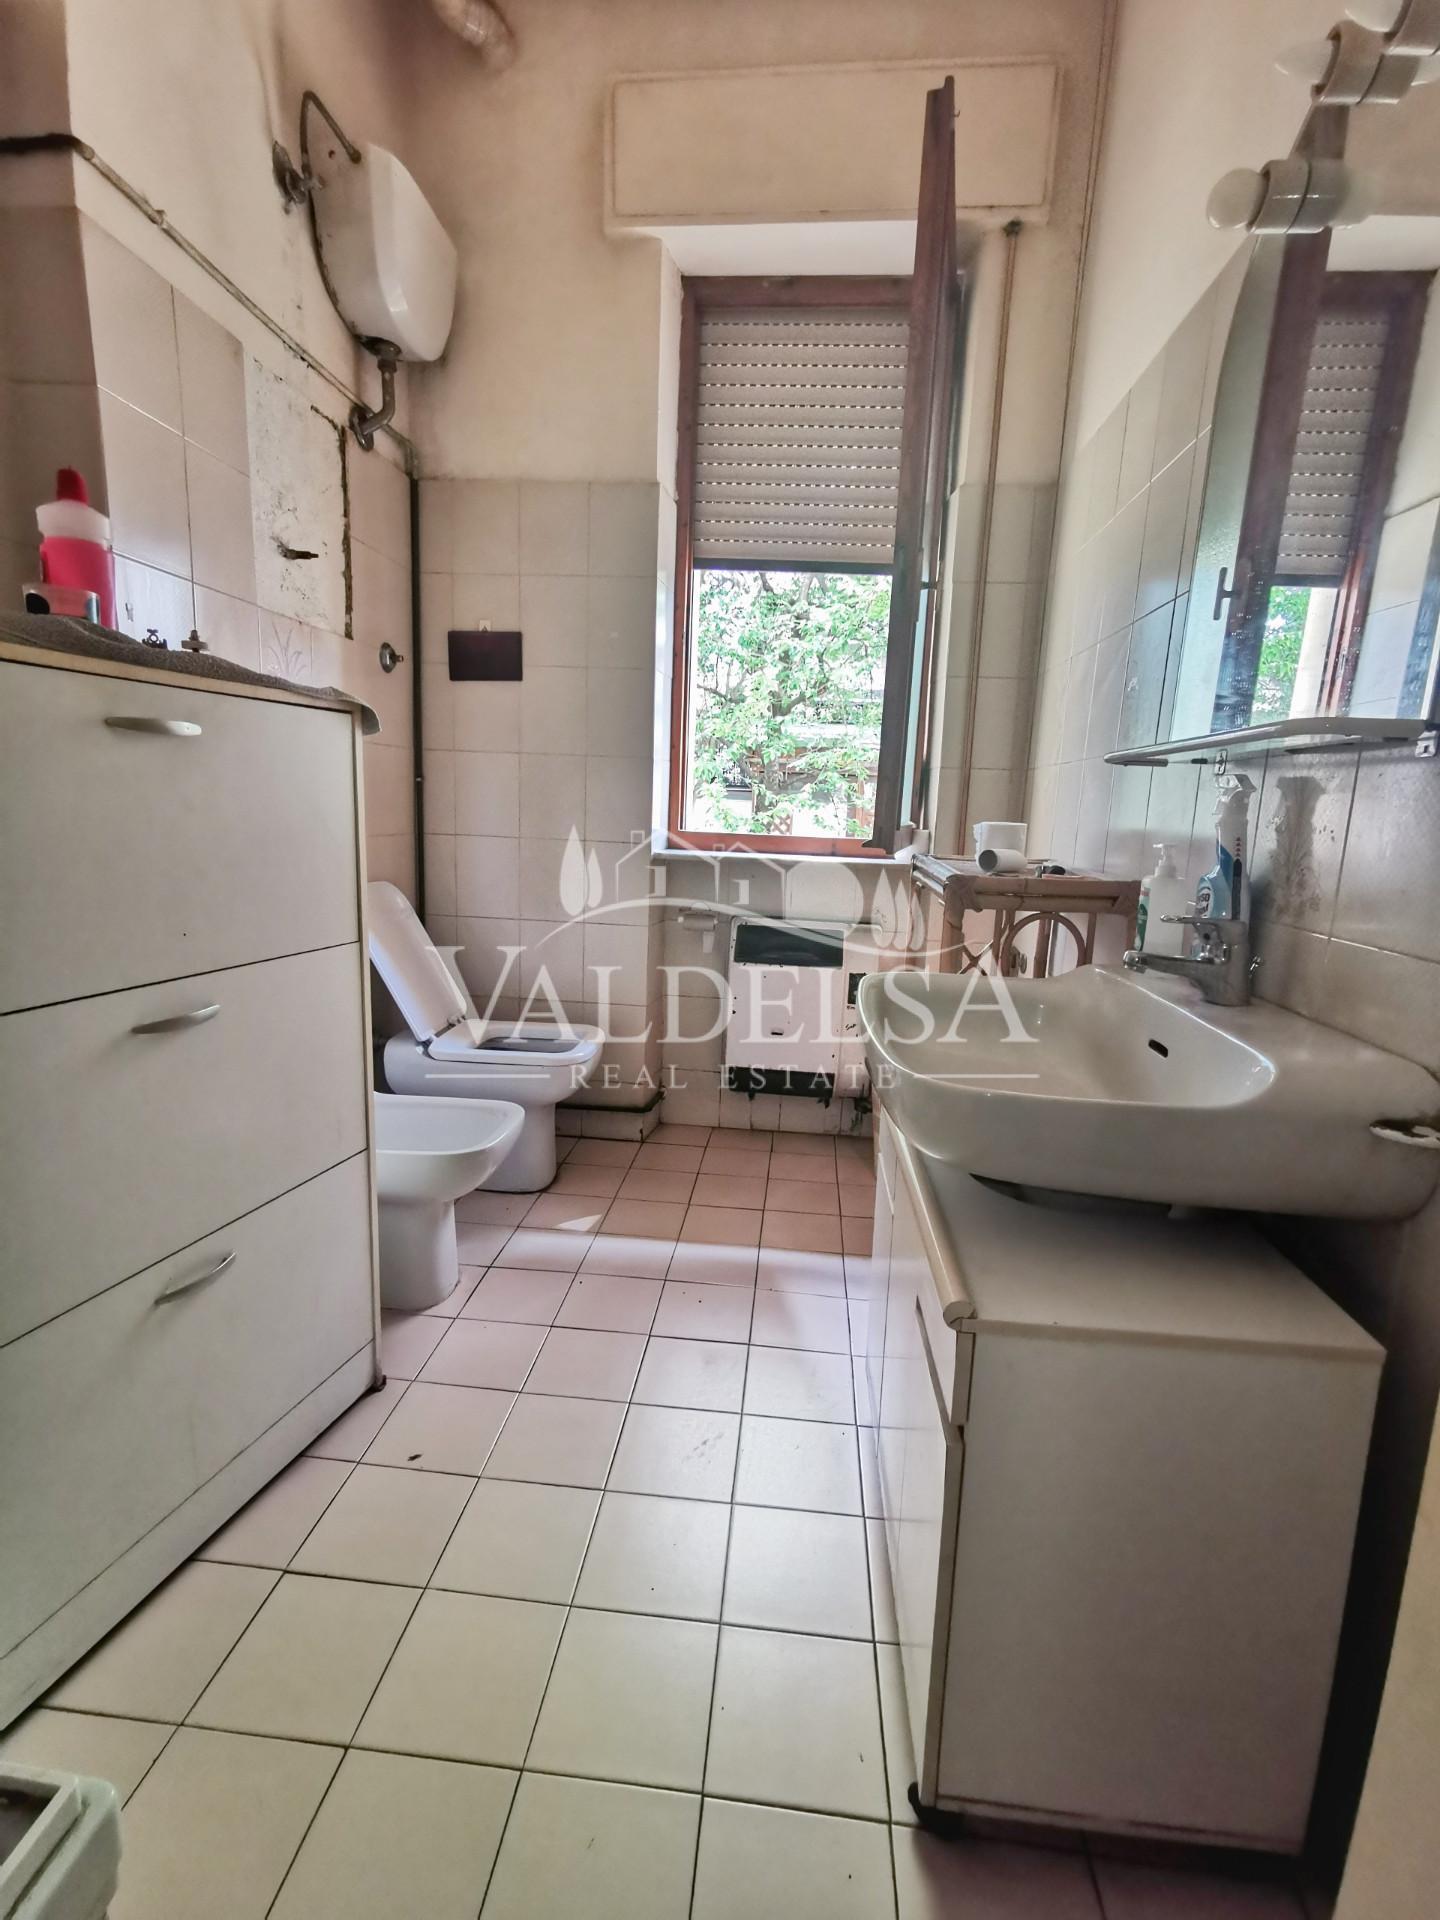 Apartment for sale, ref. 649